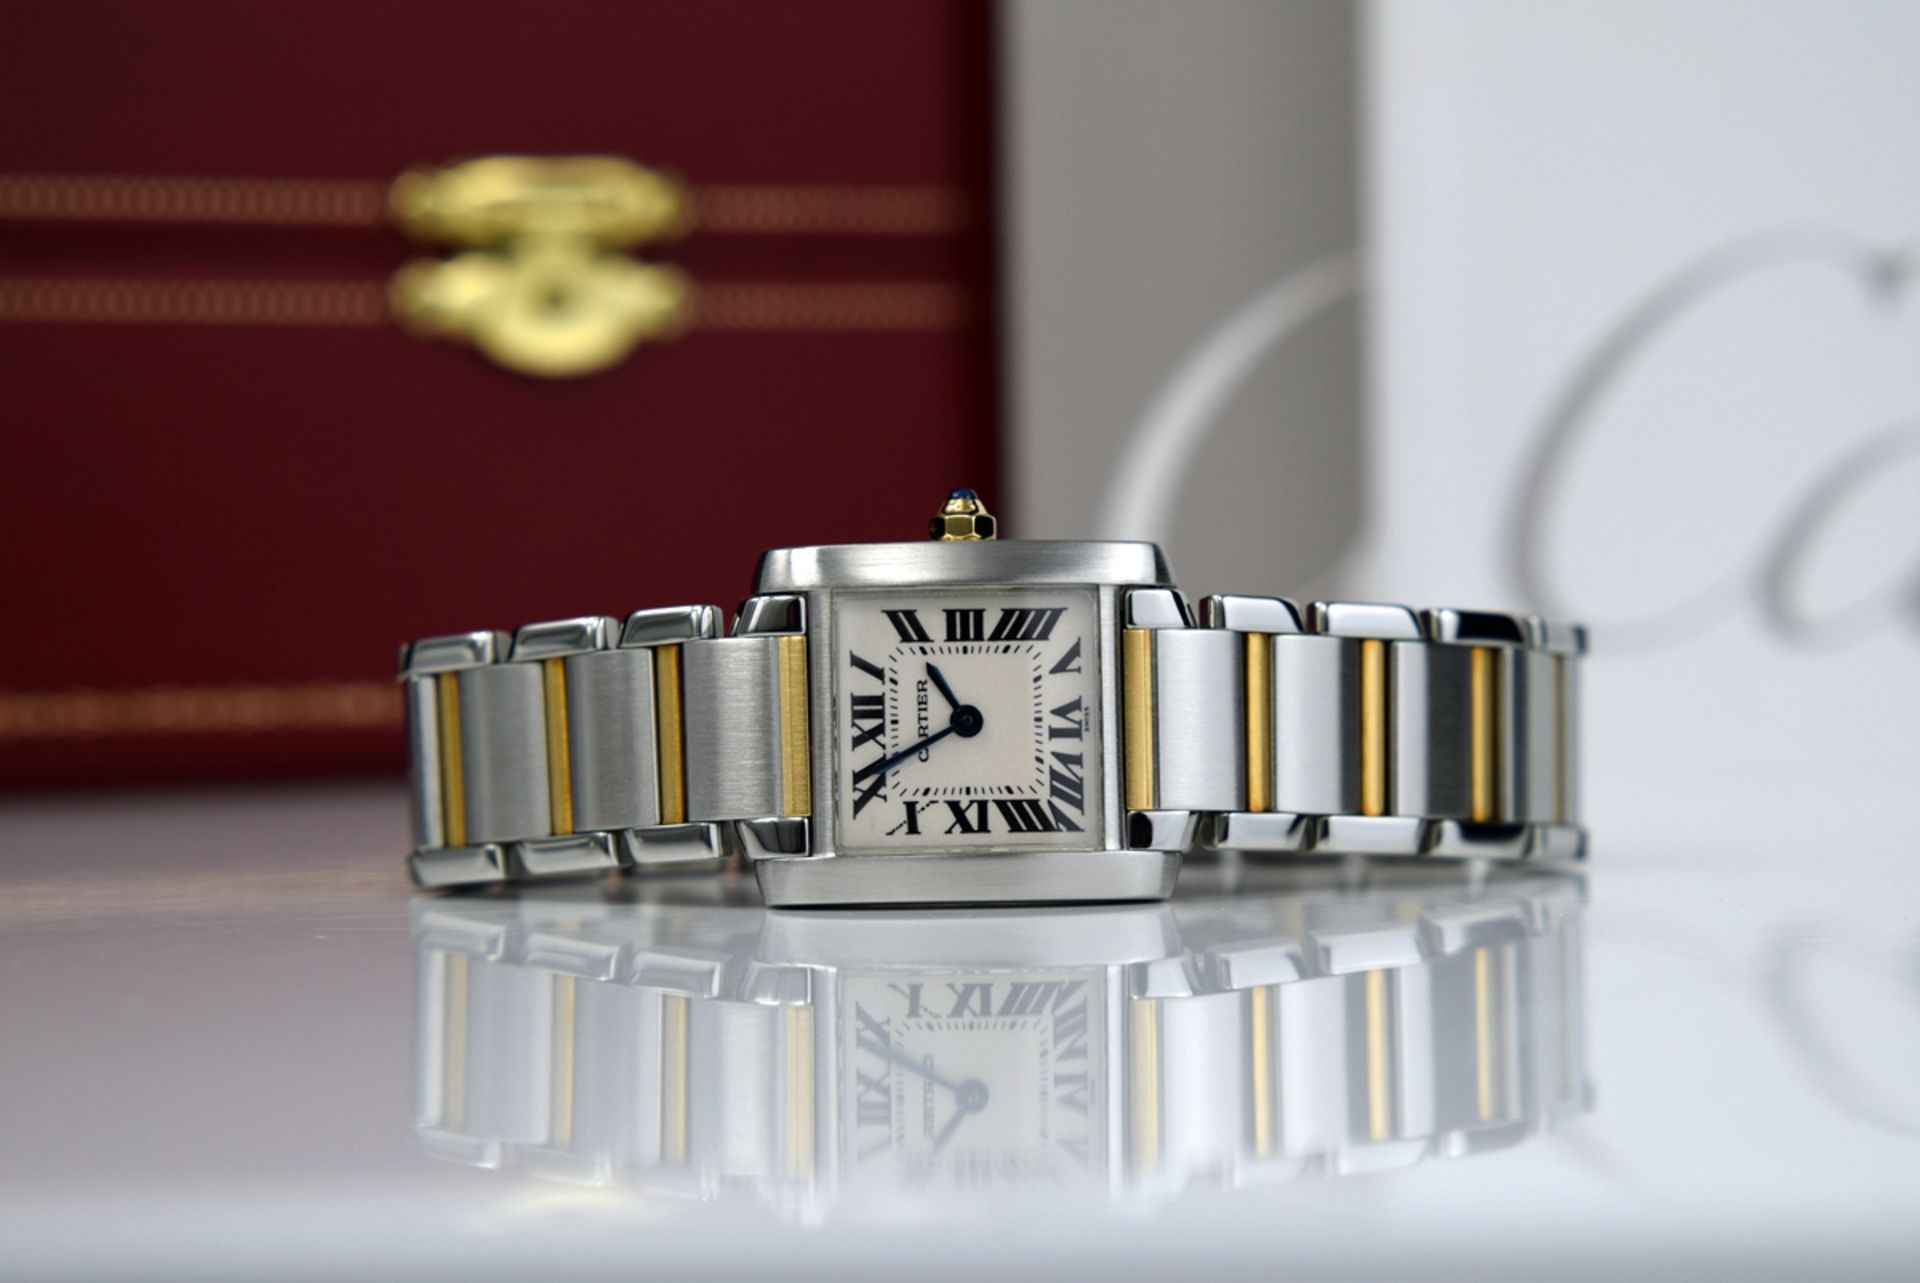 CARTIER 18K GOLD & STEEL FRANCAISE 'TANK' - W51007Q4 / 2300 - Image 10 of 10